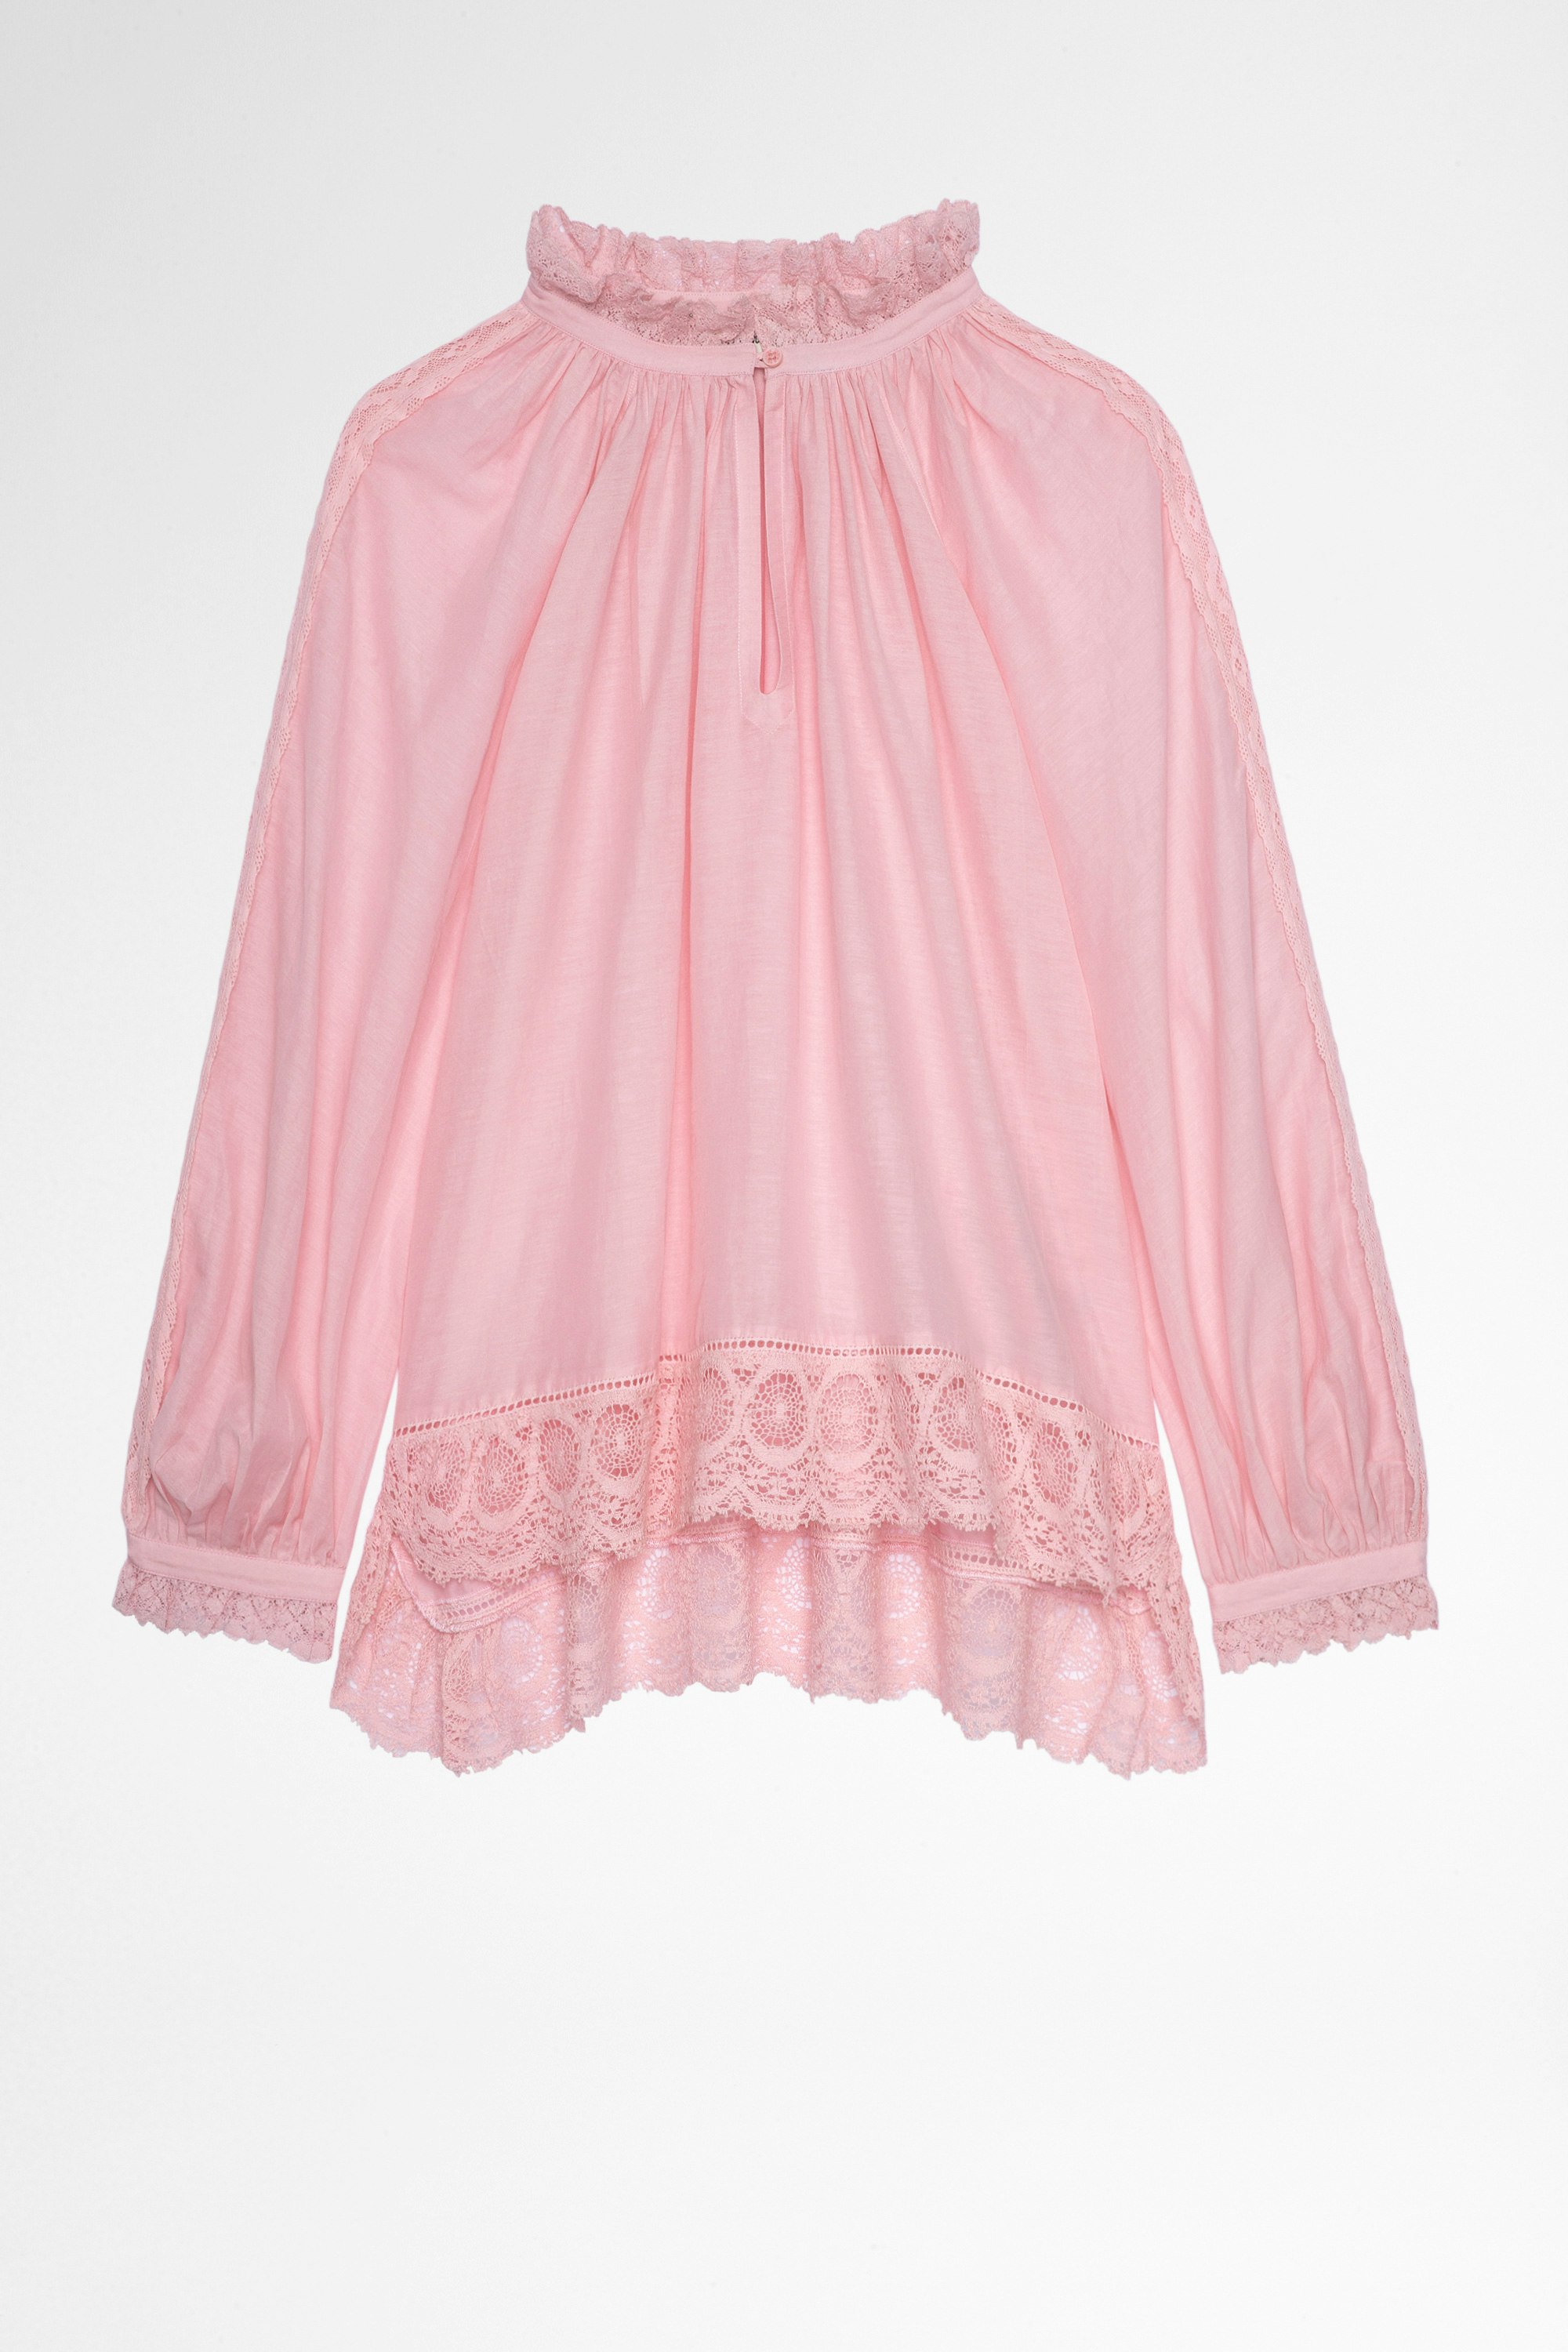 Theresa ブルーズ Women's pink cotton blouse with guipure stripes